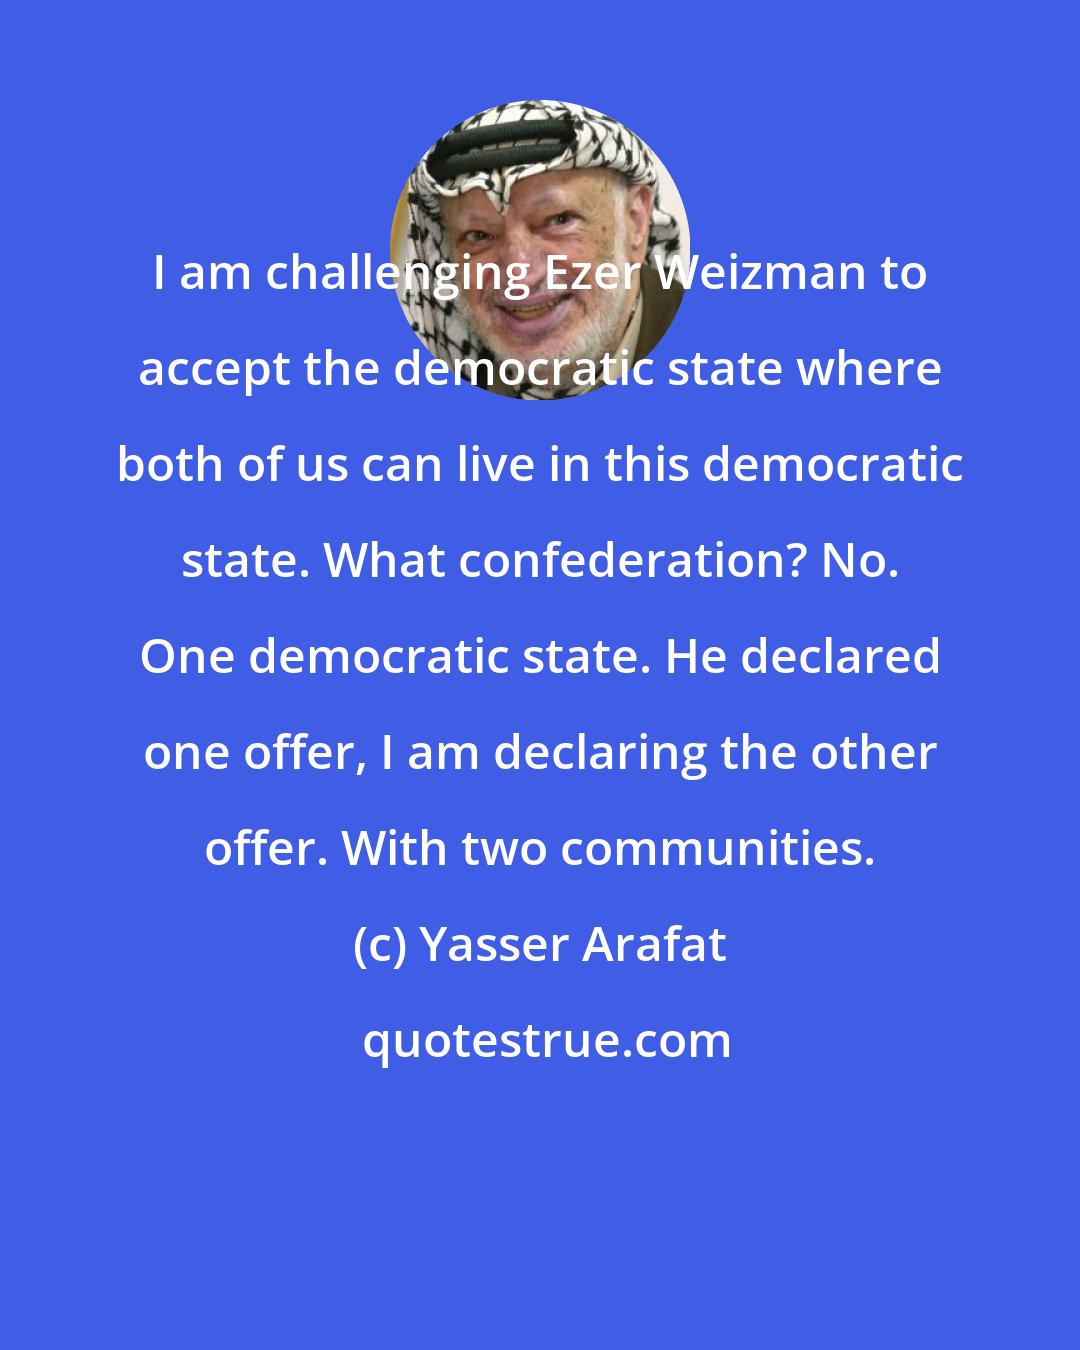 Yasser Arafat: I am challenging Ezer Weizman to accept the democratic state where both of us can live in this democratic state. What confederation? No. One democratic state. He declared one offer, I am declaring the other offer. With two communities.